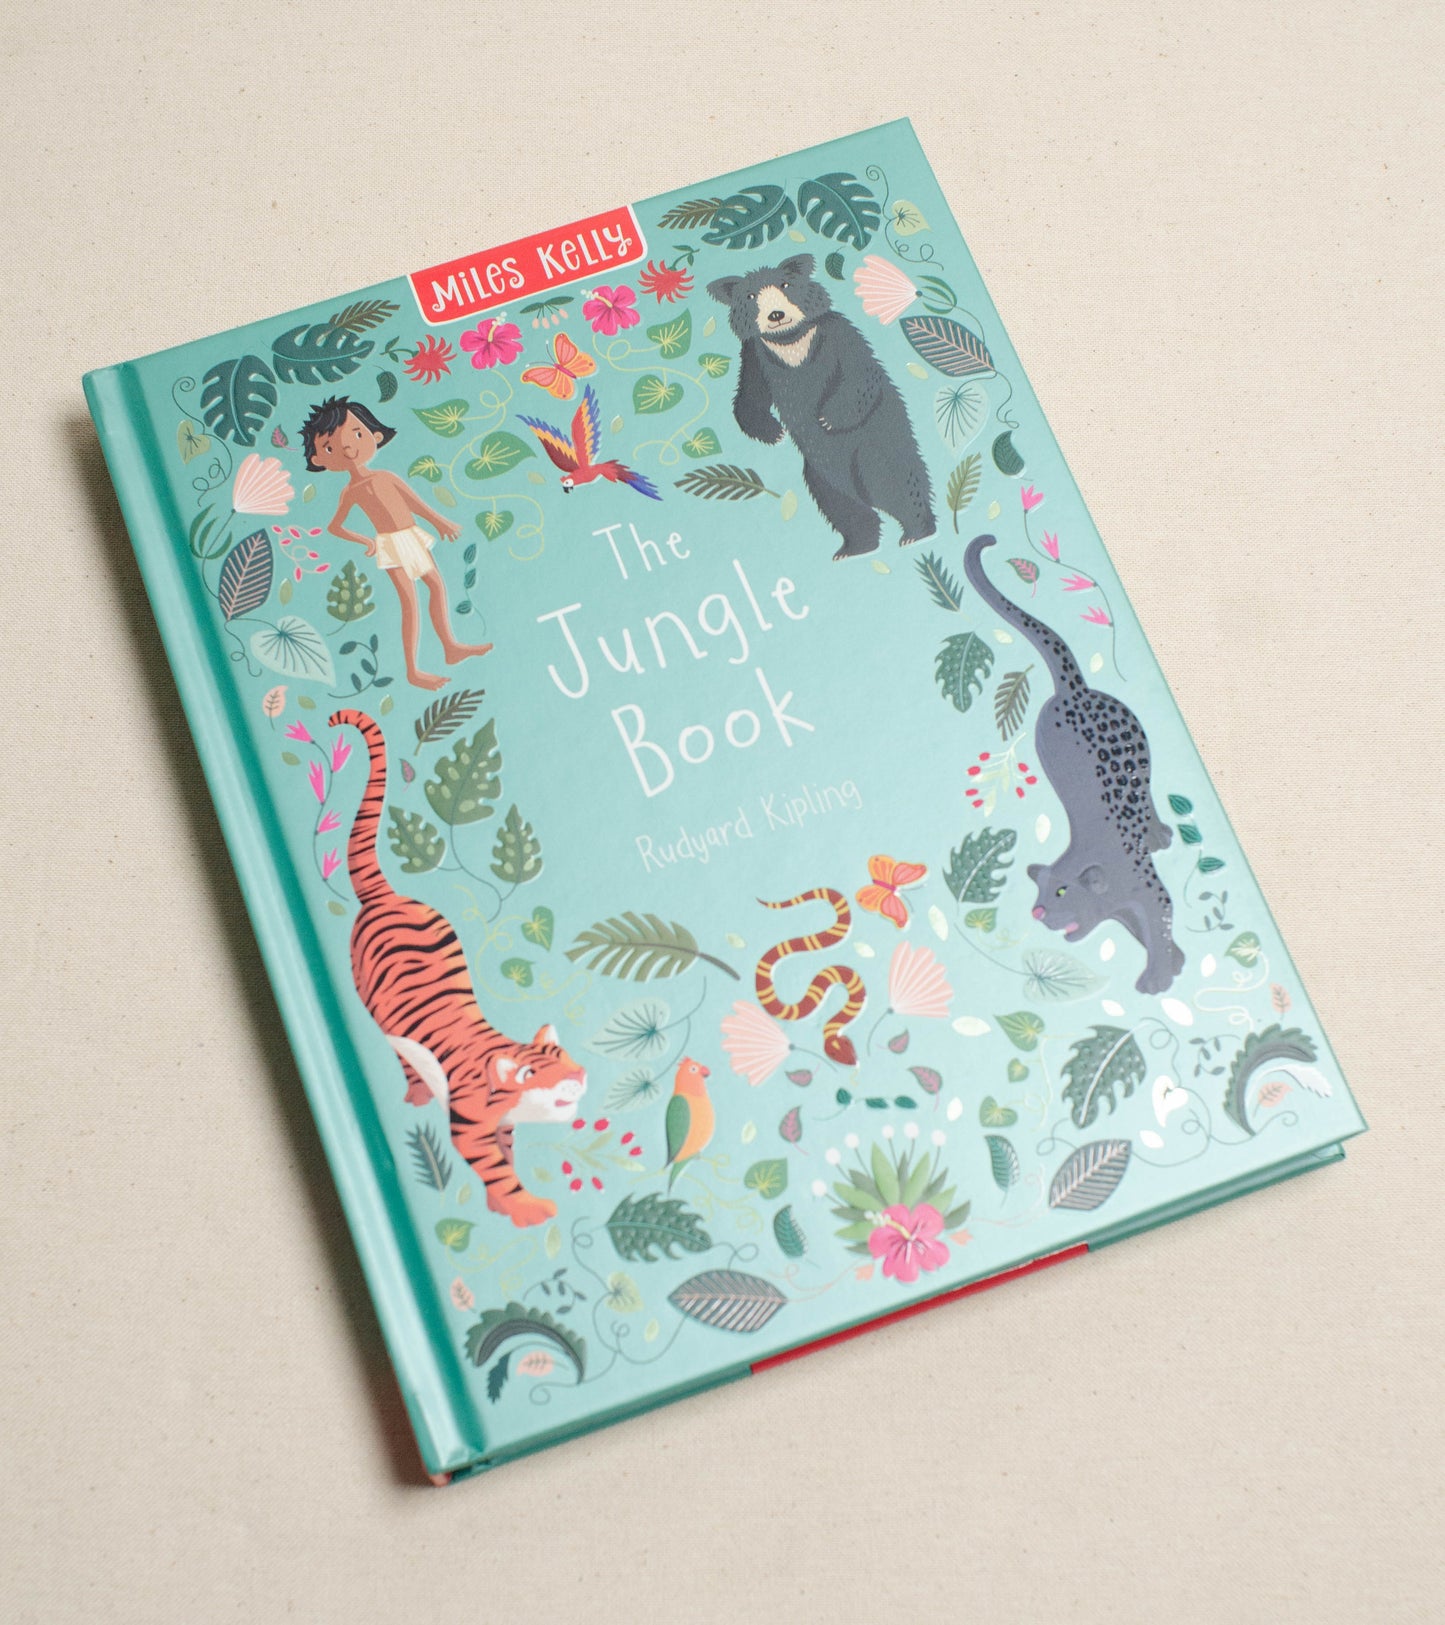 The Jungle Book Illustrated Gift Book (Miles Kelly)